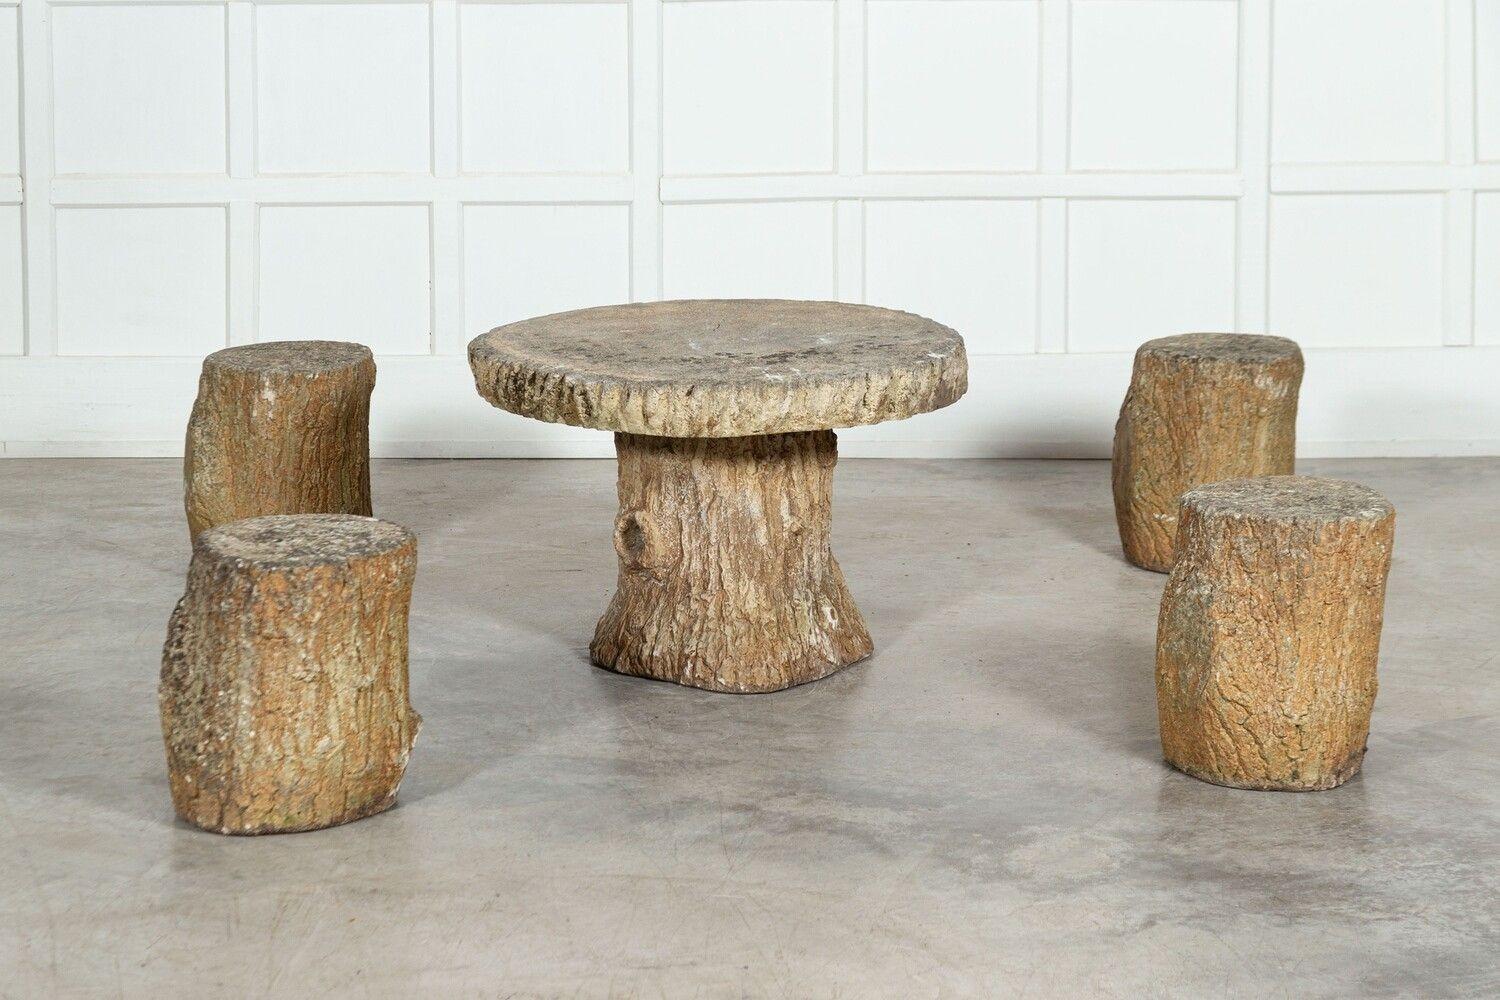 French Faux Bois Stone Garden Table & Stools Set In Good Condition For Sale In Staffordshire, GB